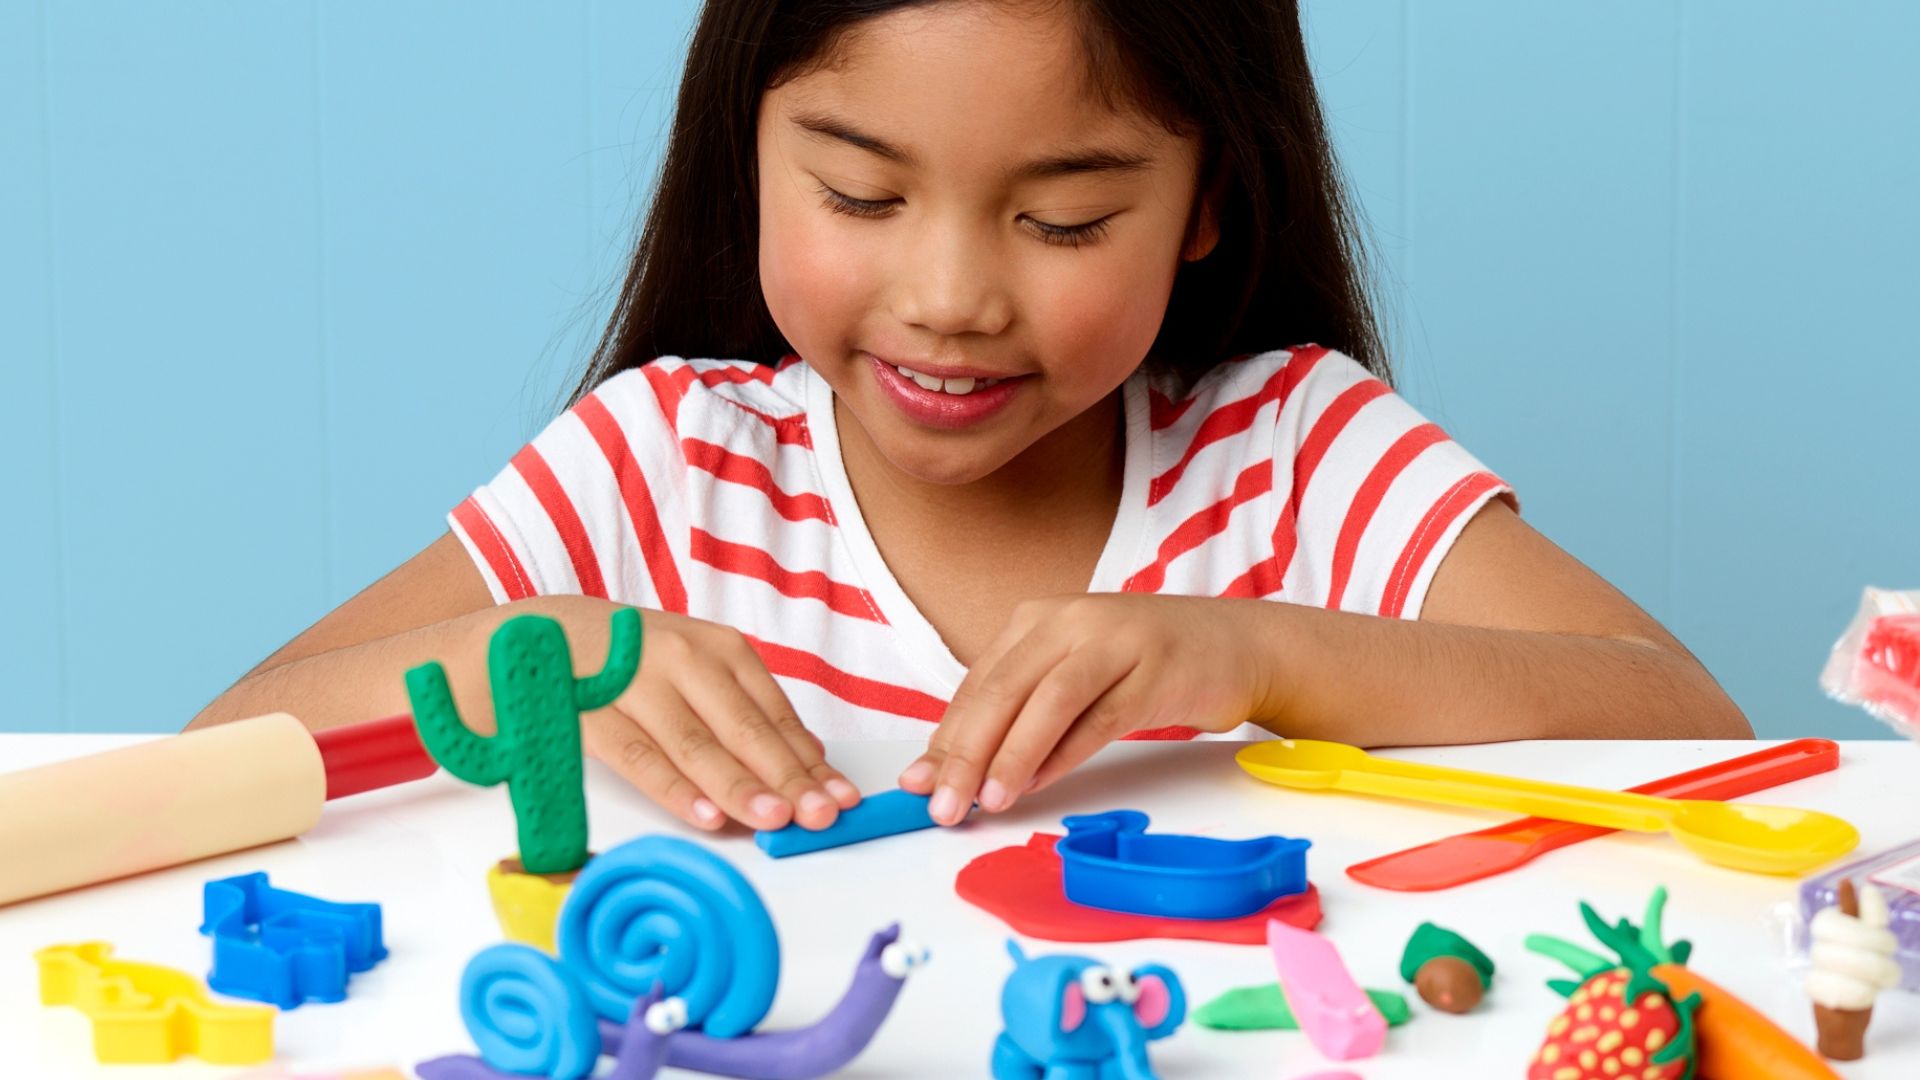 Colourful playdough, the starting point for kids' modelling and sculpture making